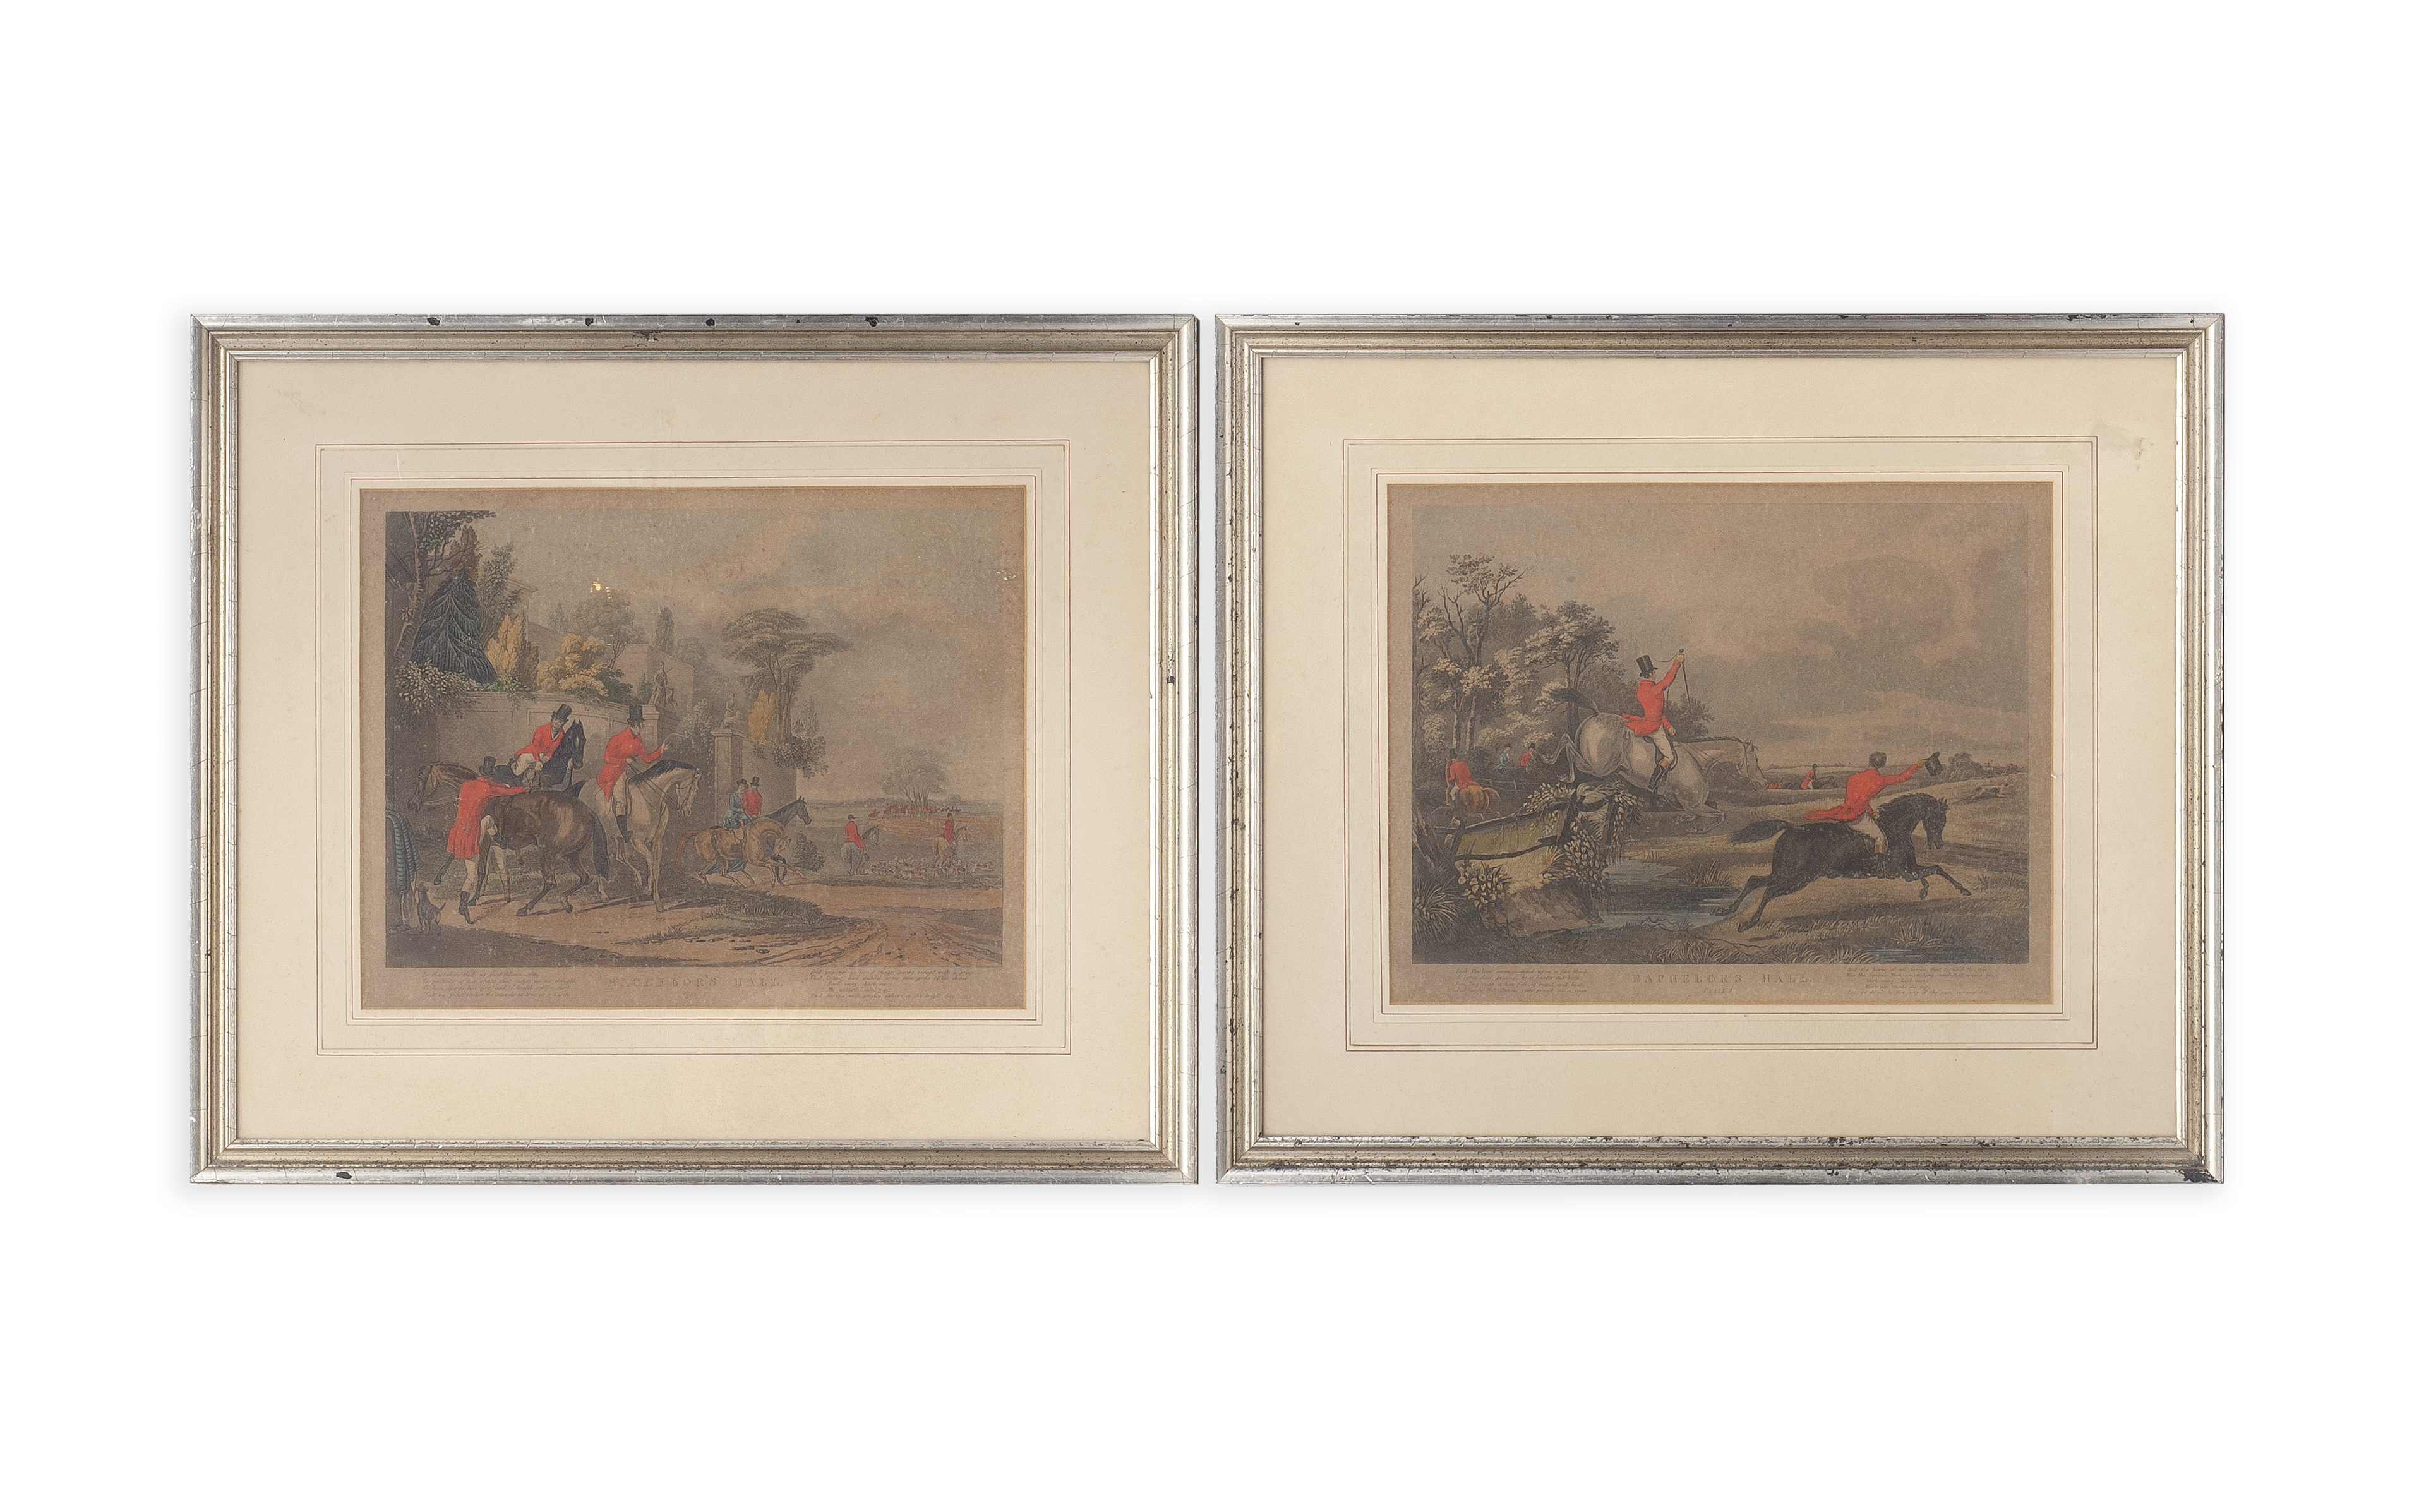 A PAIR OF 19TH CENTURY HUNTING SCENES TOGETHER WITH TEN OTHER PRINTS